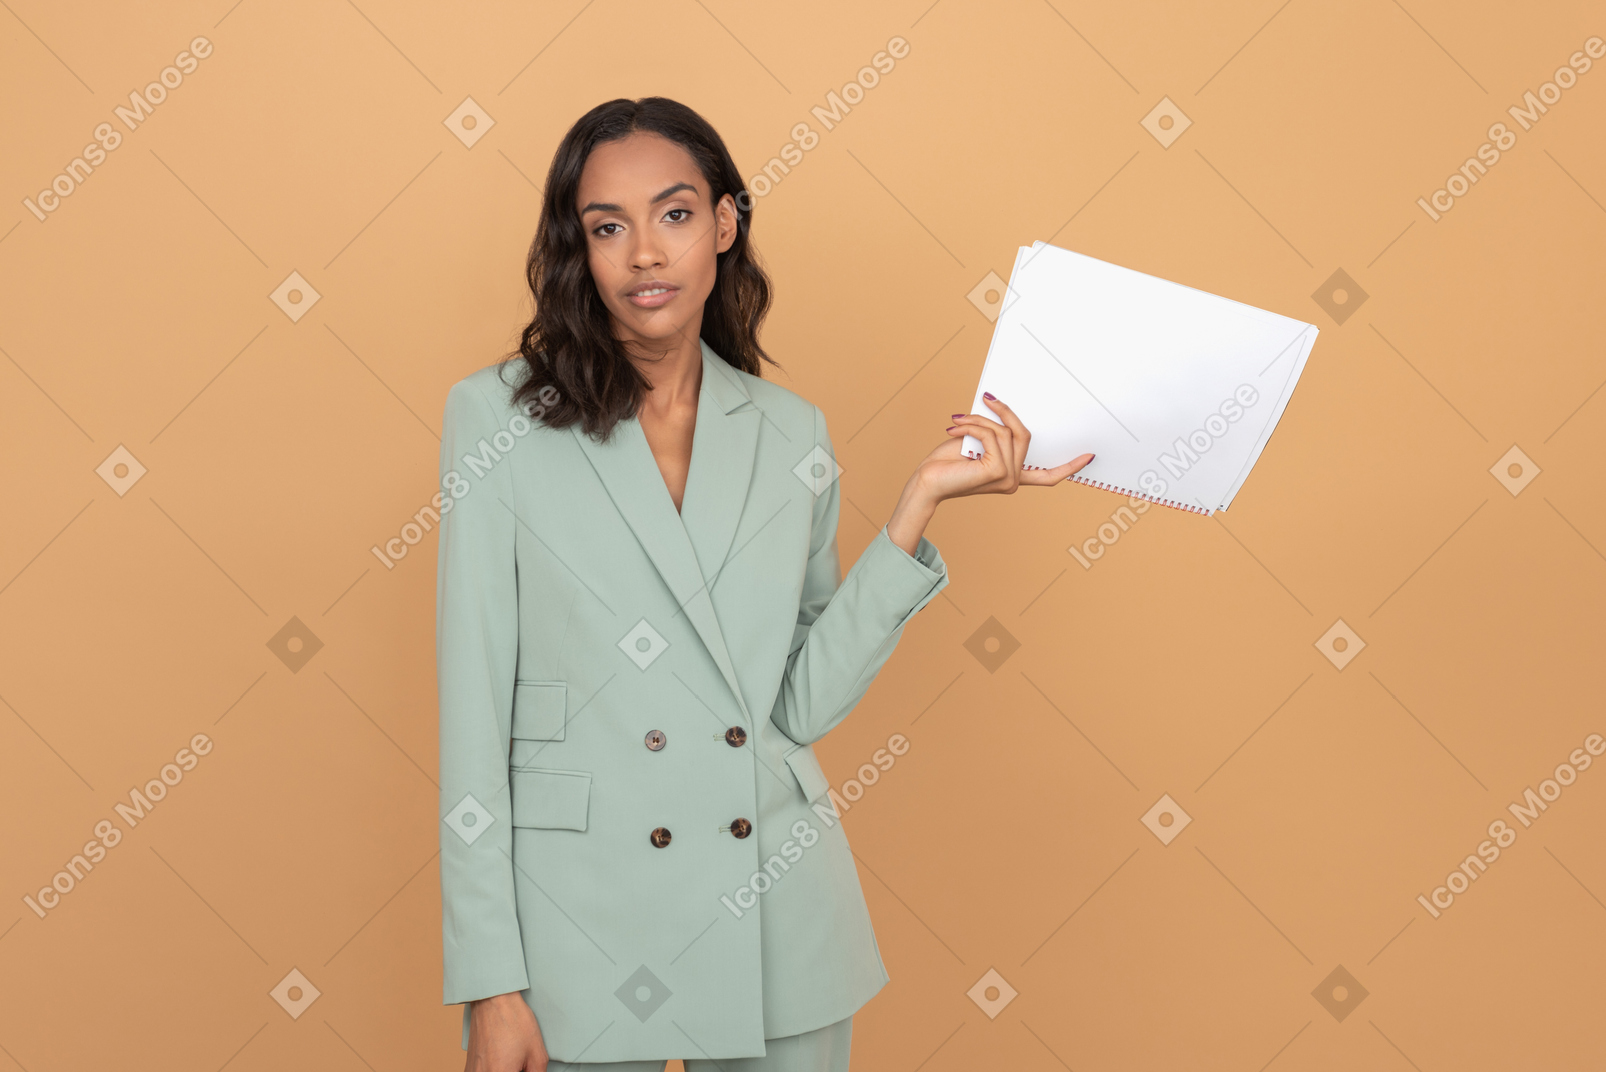 Attractive young businesswoman with serious face holding papers